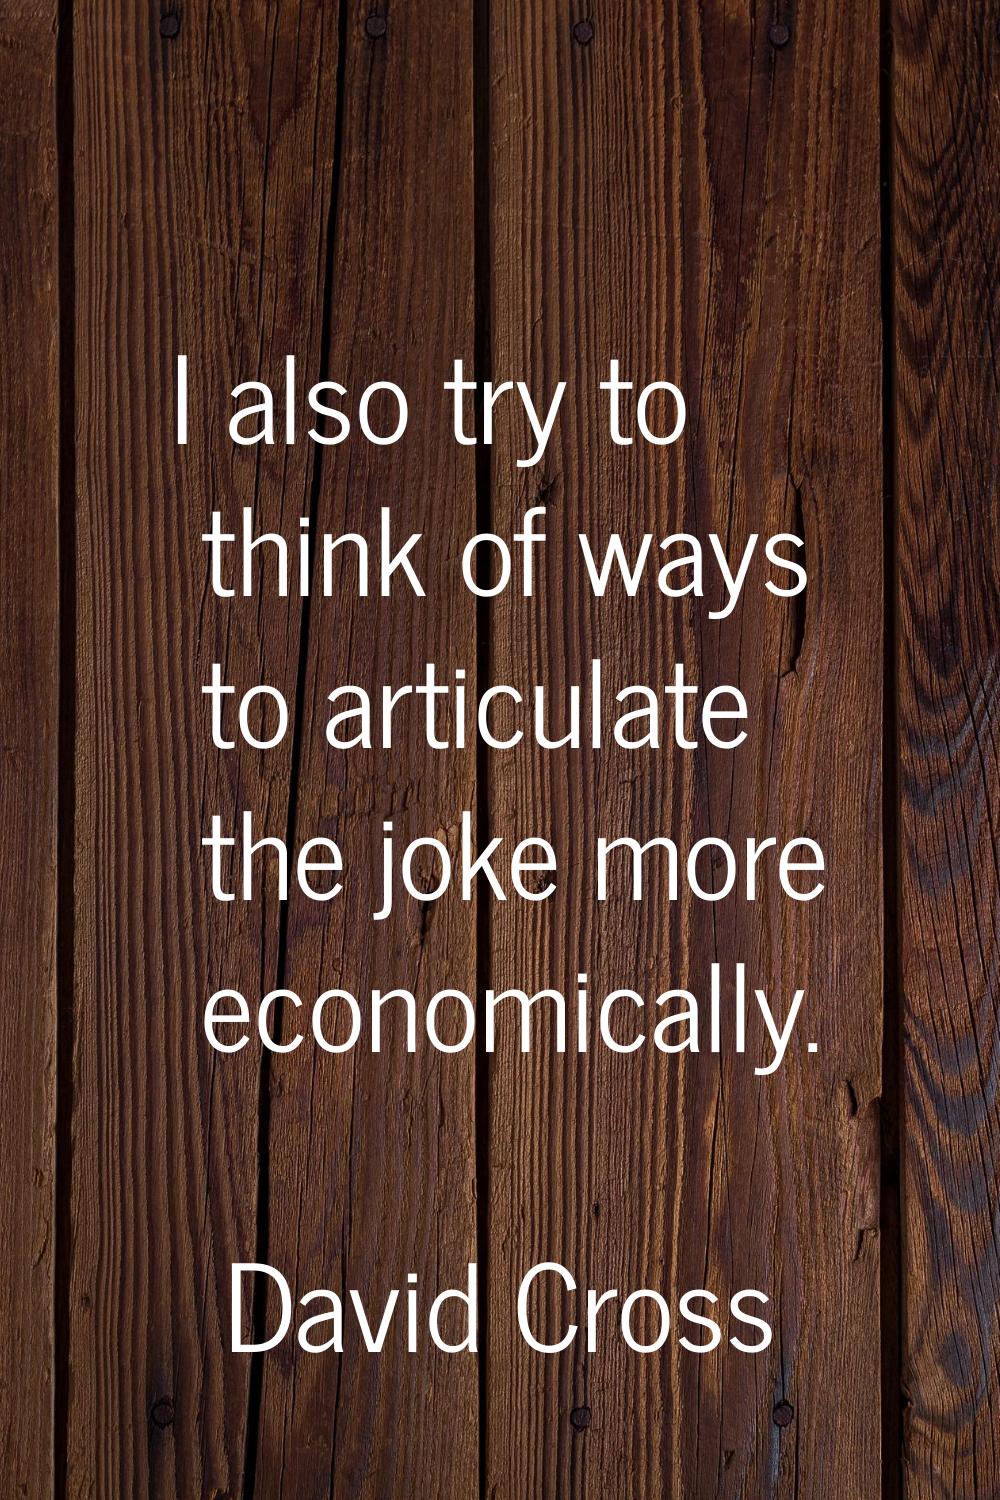 I also try to think of ways to articulate the joke more economically.